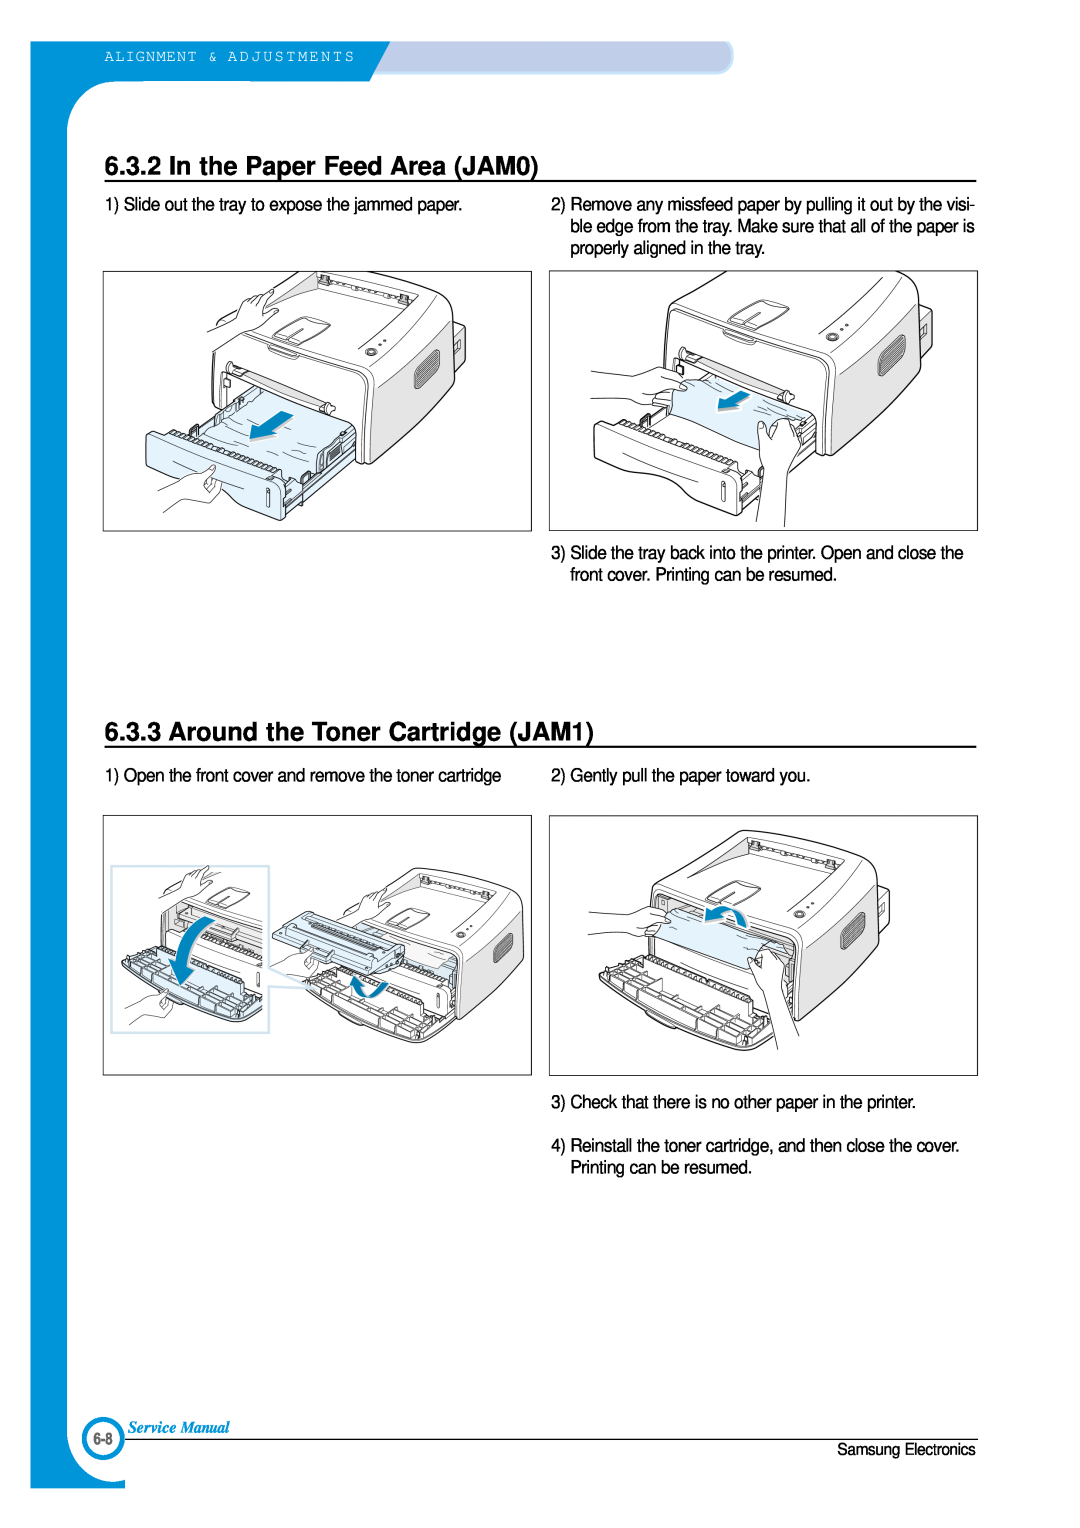 Samsung ML-1700 specifications In the Paper Feed Area JAM0, Around the Toner Cartridge JAM1 